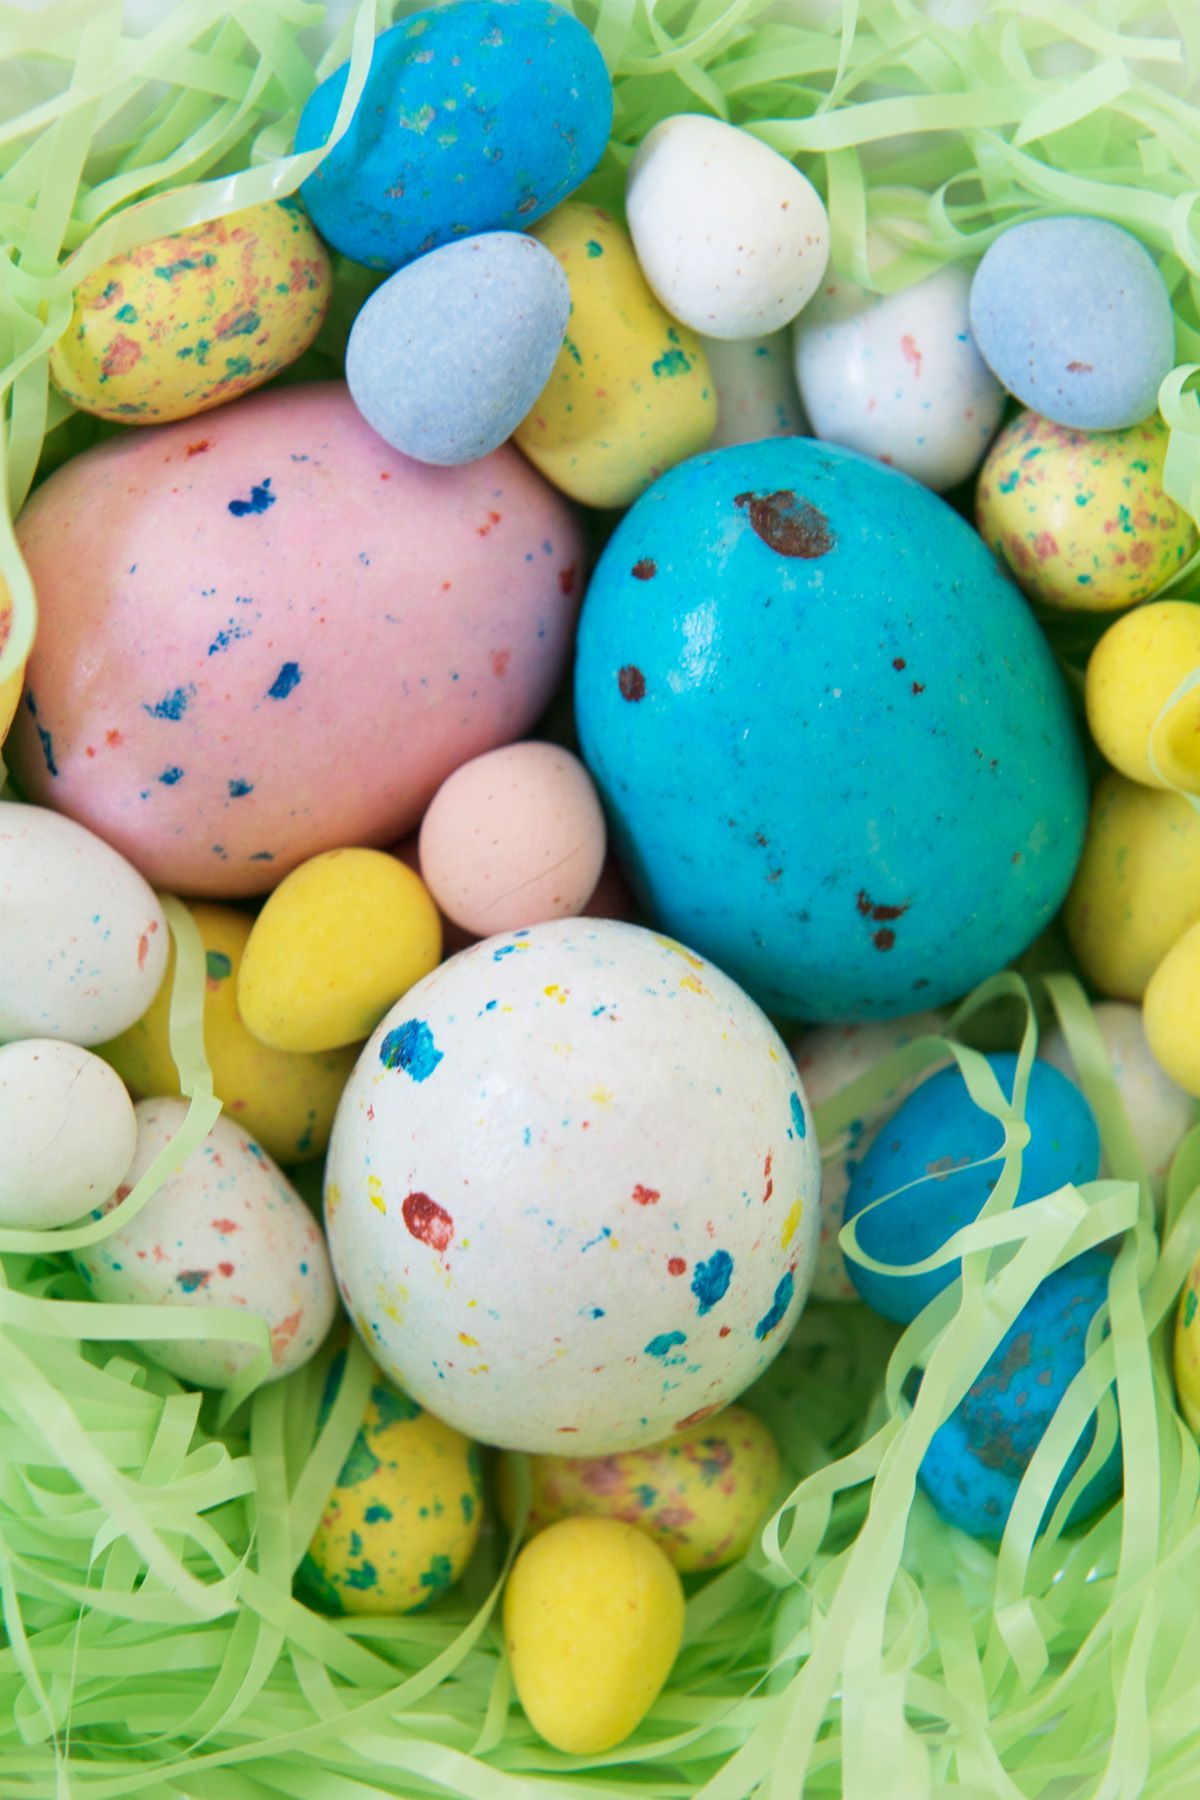 12 Easter Fun Facts - Interesting Trivia About Easter